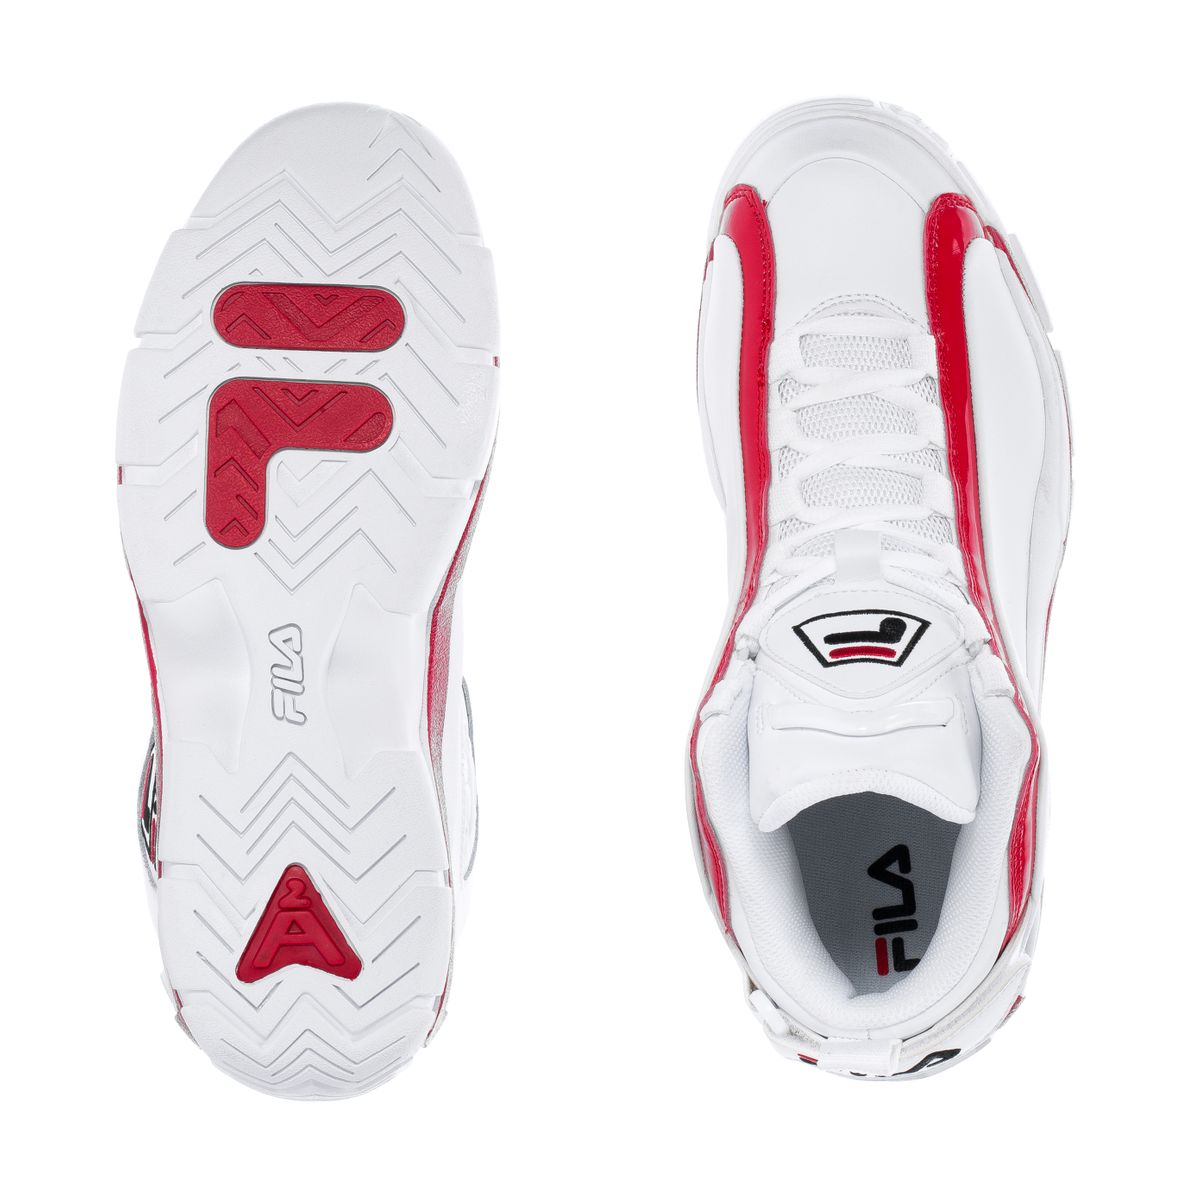 FILA WHITE RED GRANT HILL 2 MENS SHOES - 8586